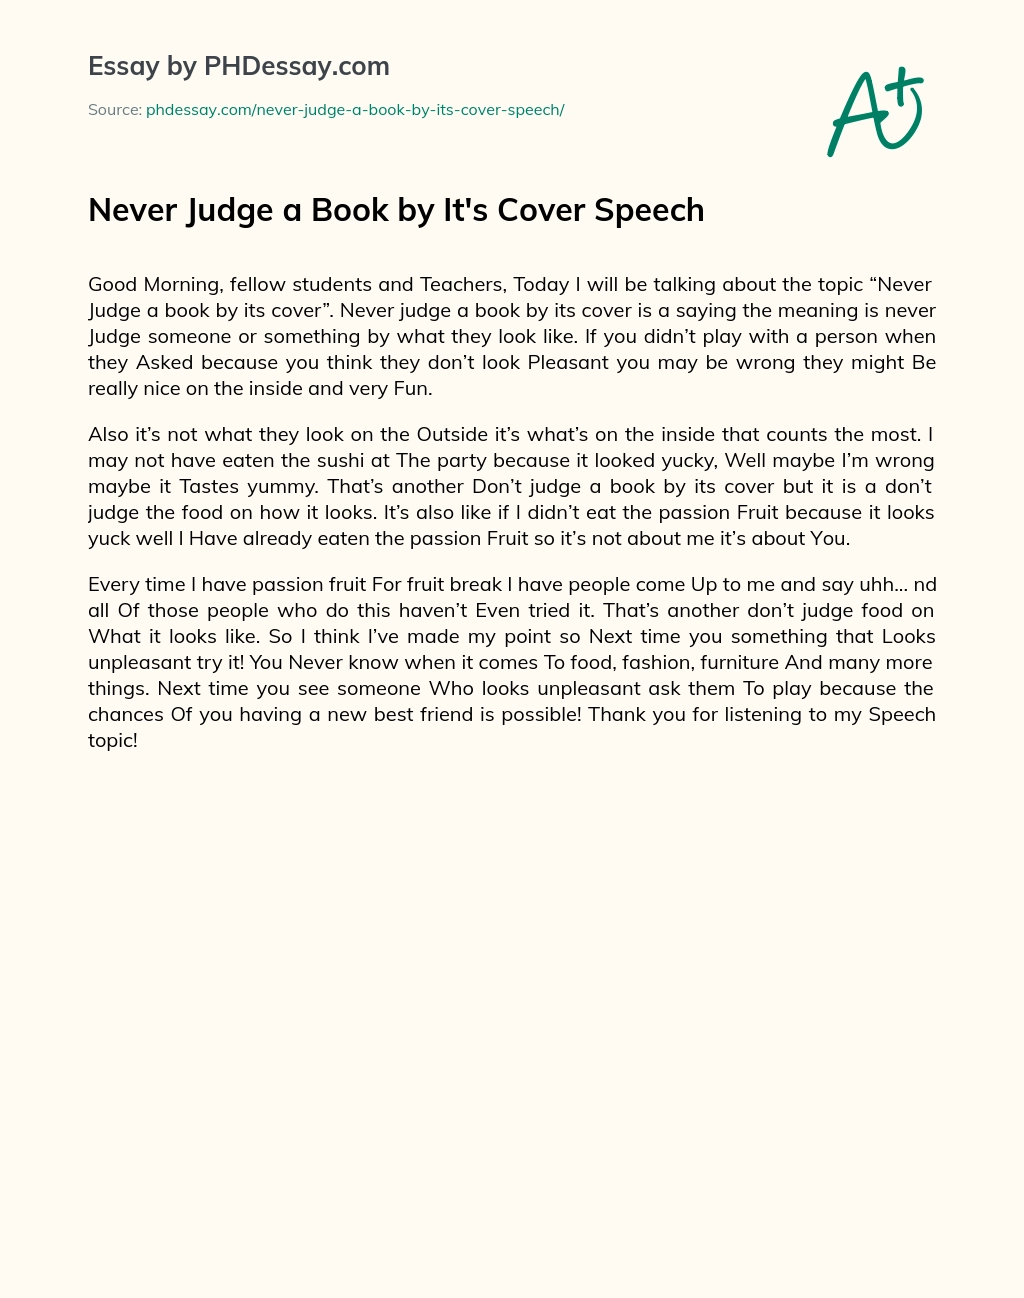 Never Judge a Book by It’s Cover Speech essay